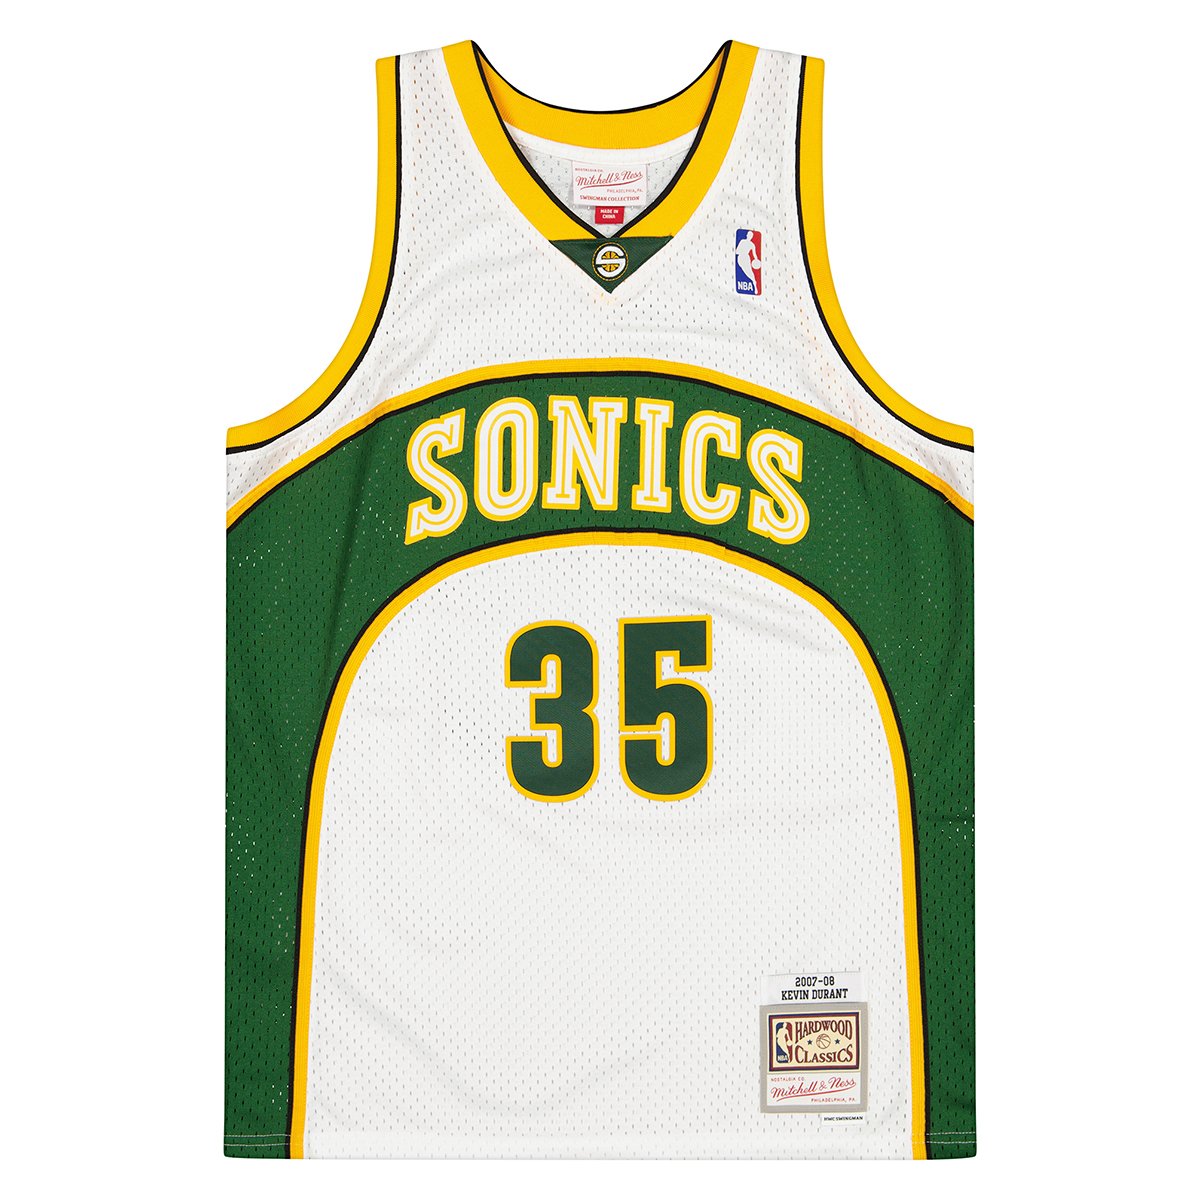 Seattle Supersonics (Sonics) Basketball Shorts – Jerseys and Sneakers